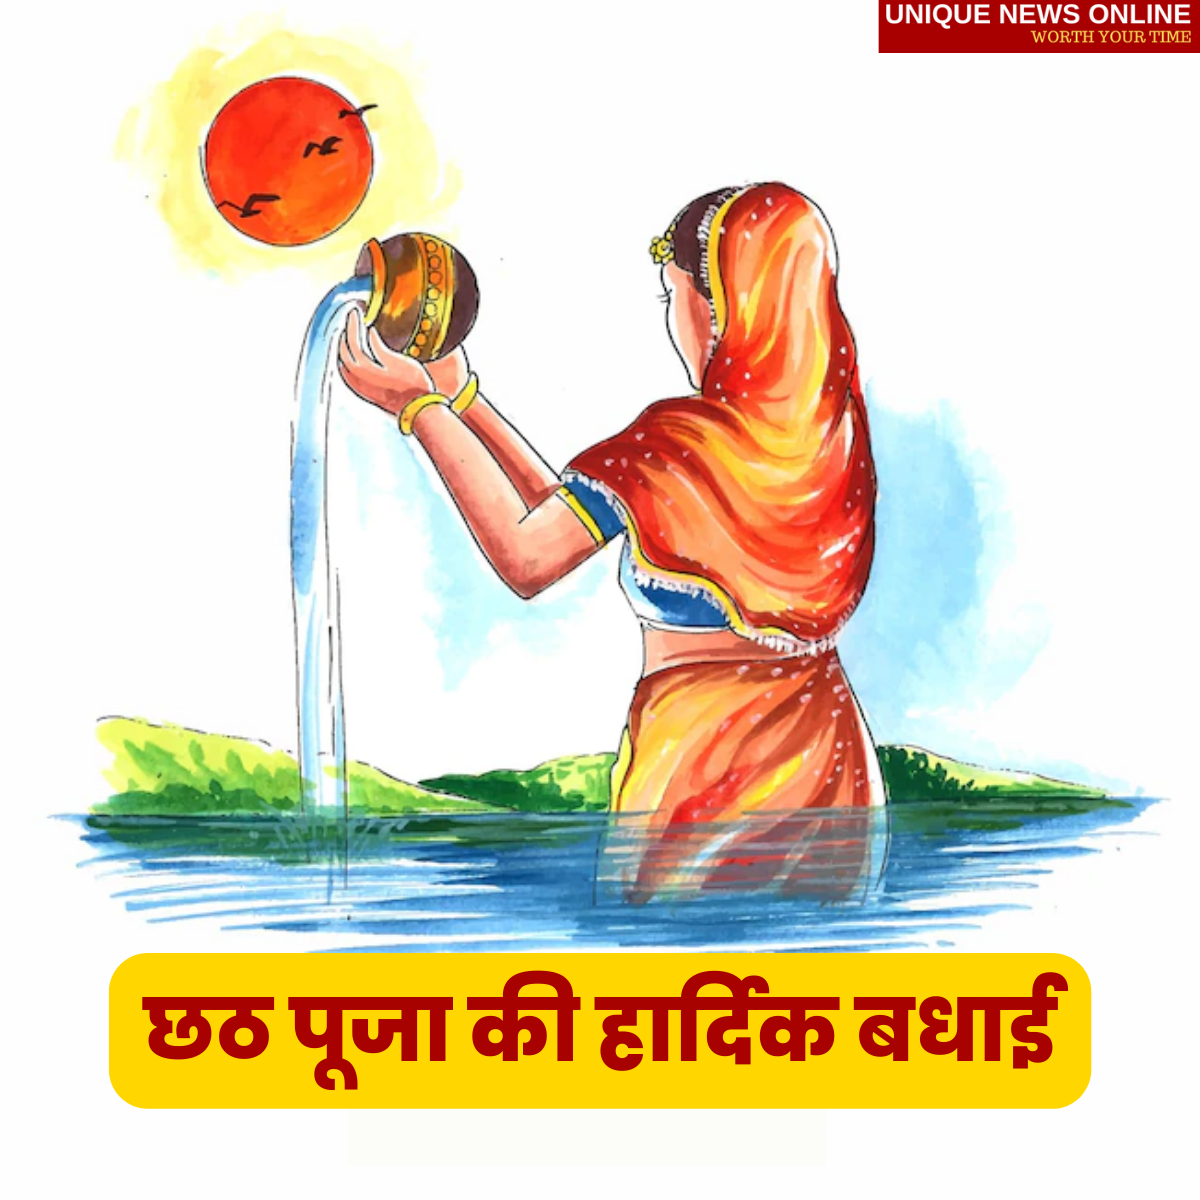 Nahay Khay Chhath Puja 2022 Wishes in Hindi, Greetings, Messages, Quotes, Posters, Images, Greetings, Shayari, Slogans and Background